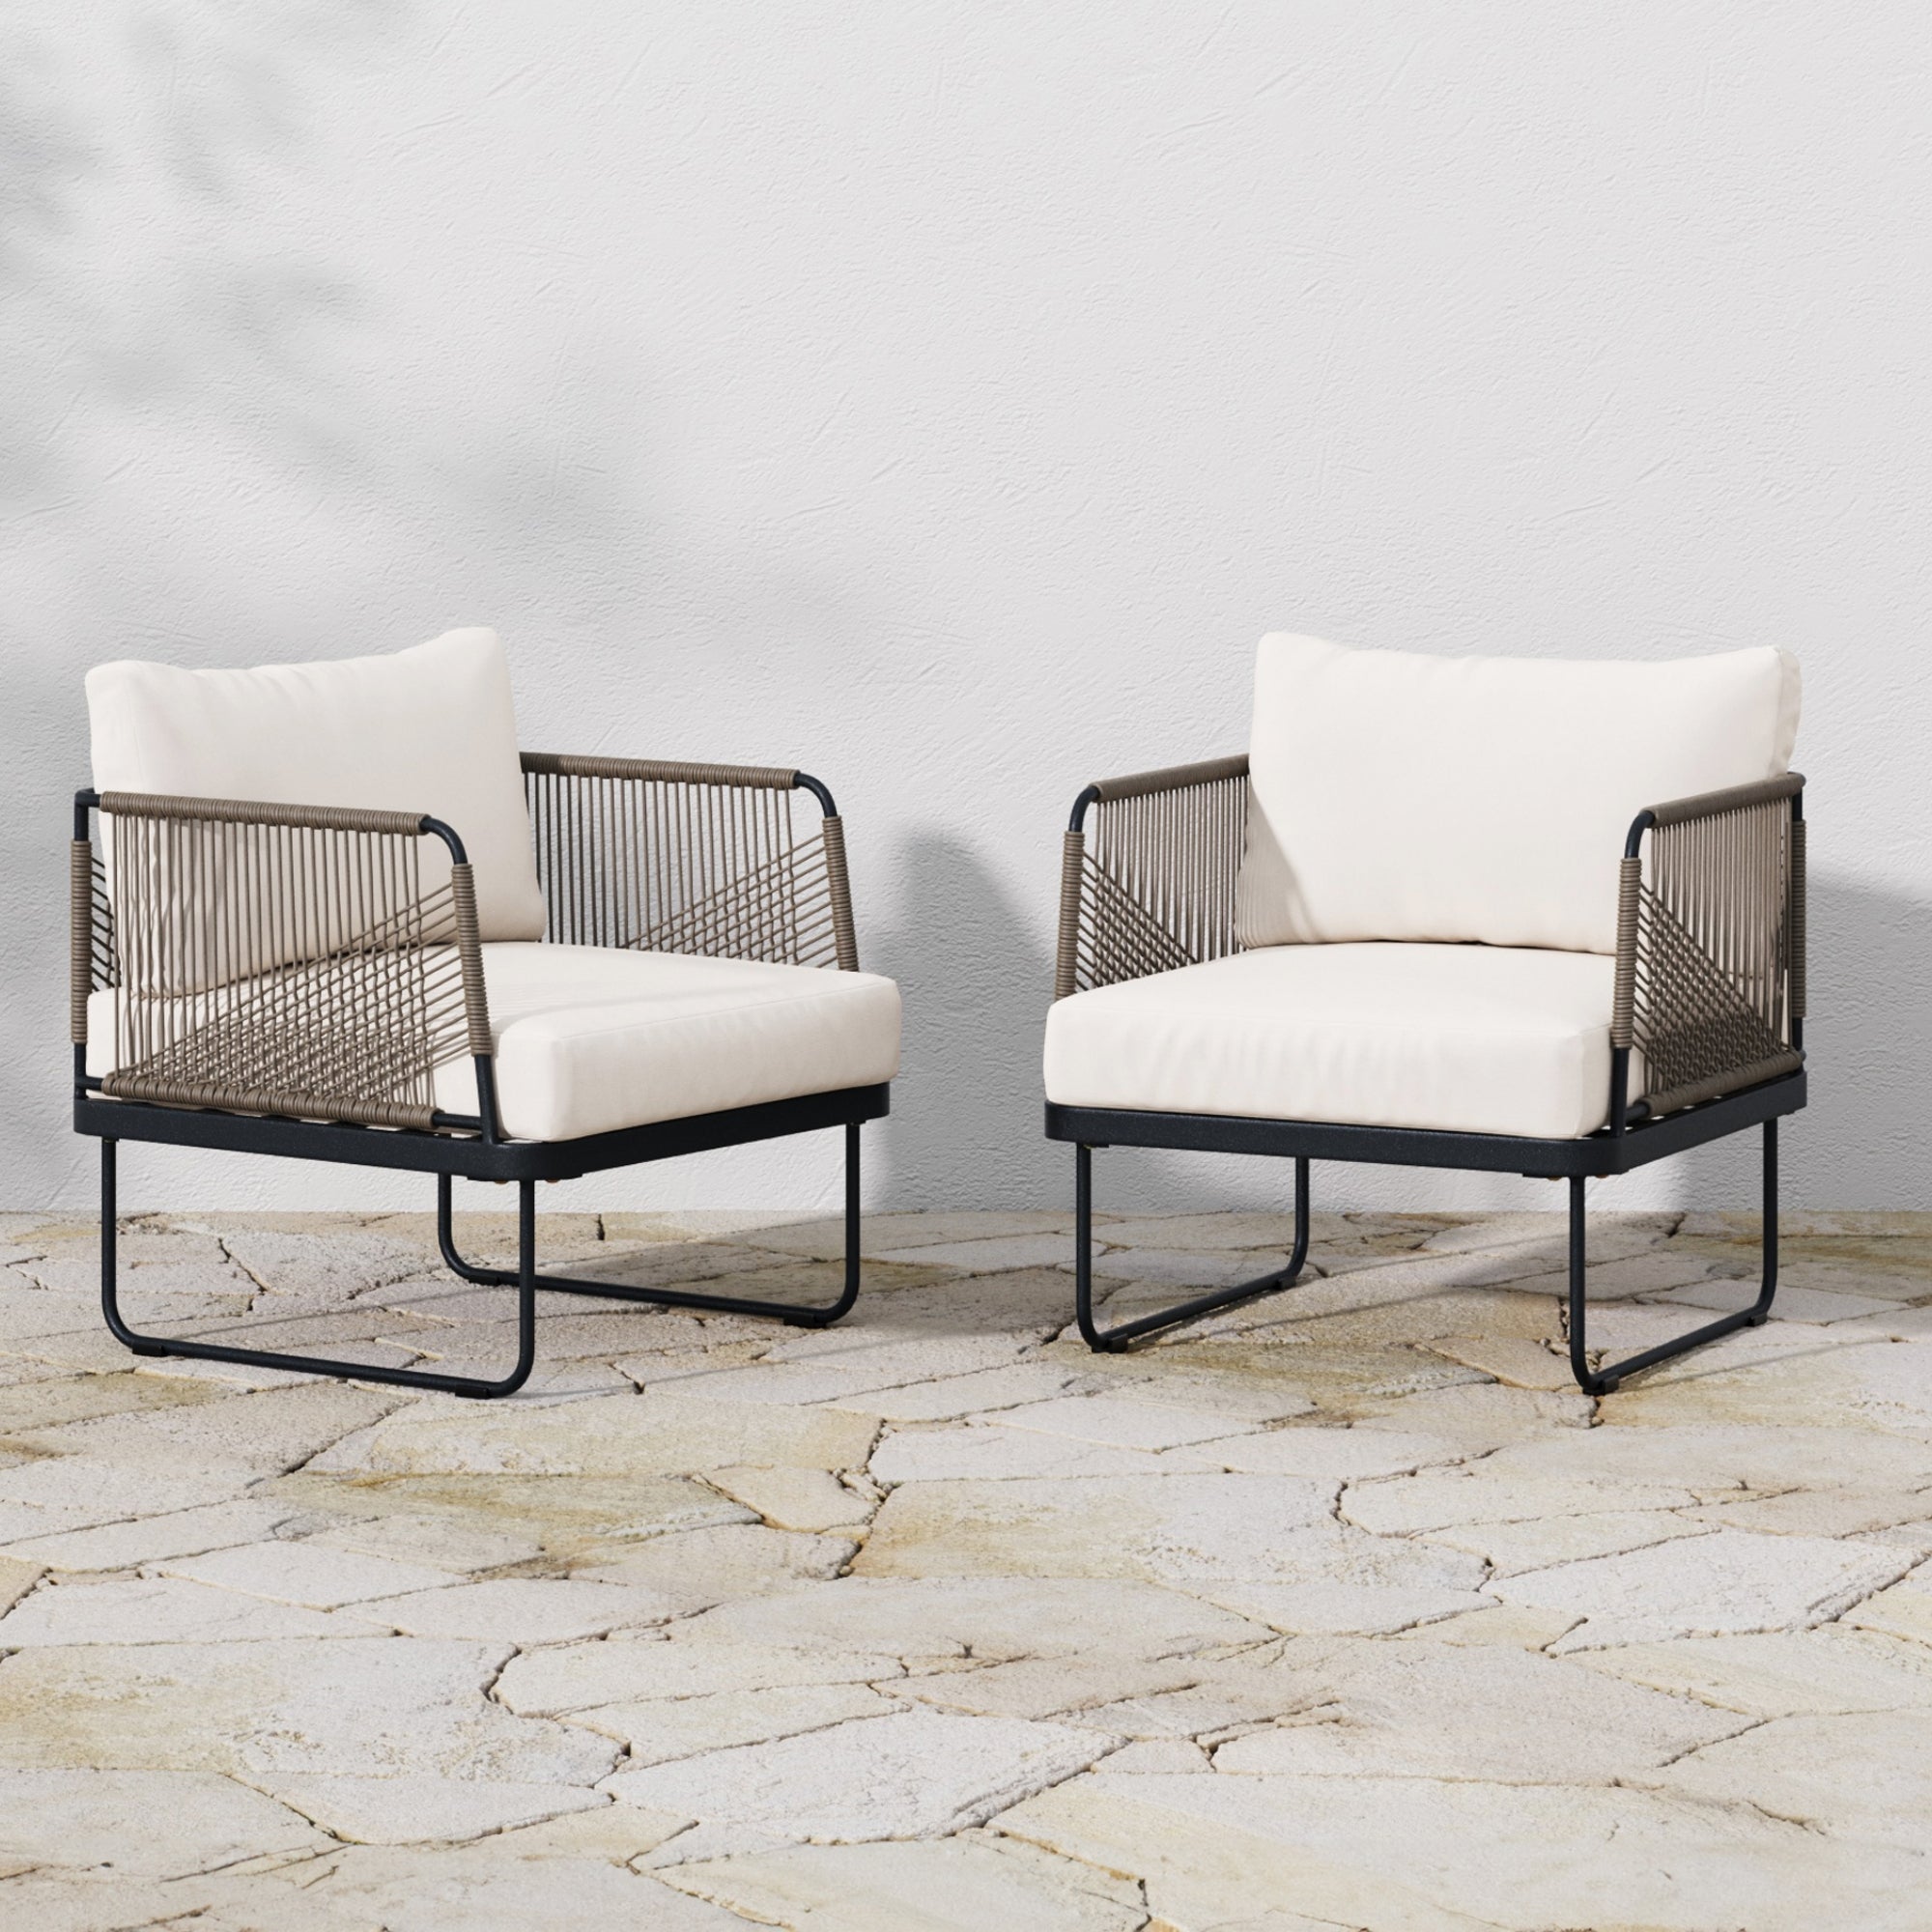 Set of 2 Outdoor Cord Patio Arm Chairs White